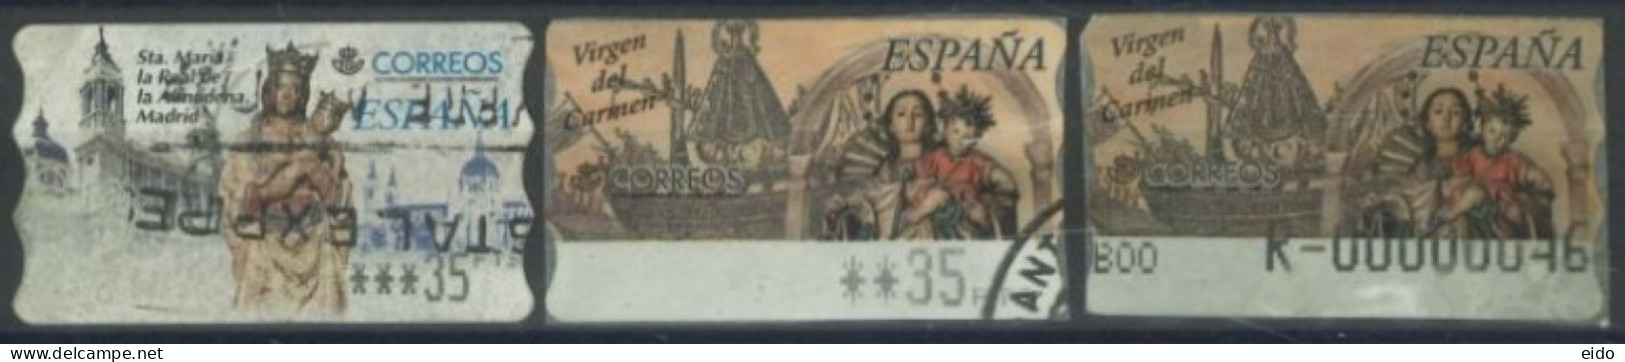 SPAIN - 2000 - ST. MARIA  AND VIRGIN OF CARMEN . STAMPS LABELS SET OF 3 OF DIFFERENT VALUES, USED . - Gebraucht